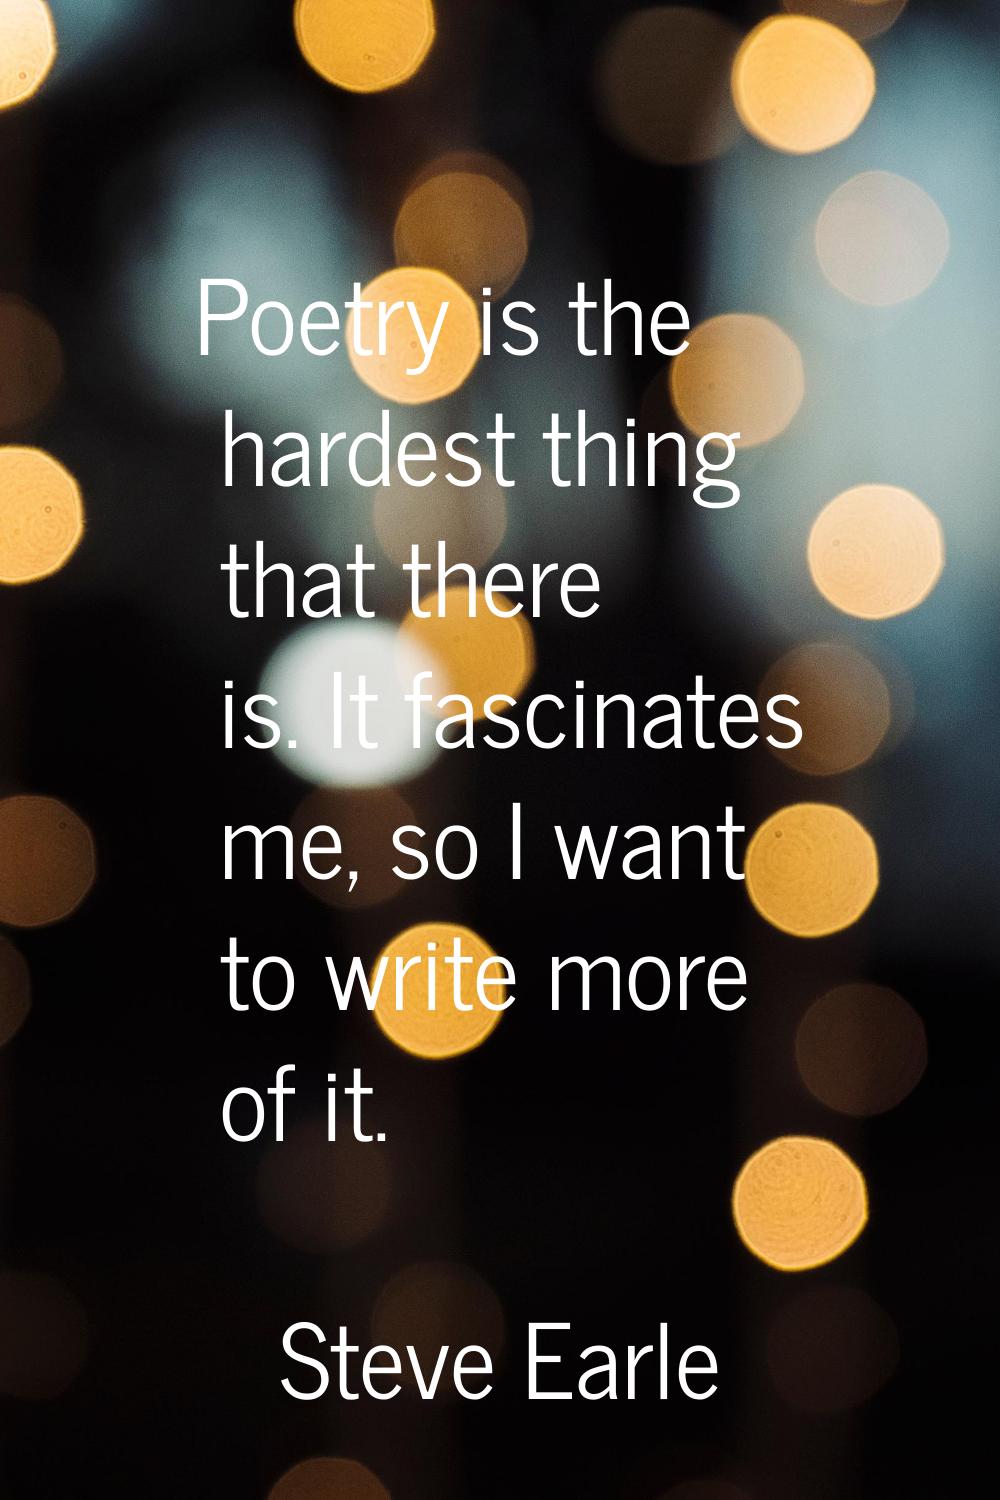 Poetry is the hardest thing that there is. It fascinates me, so I want to write more of it.